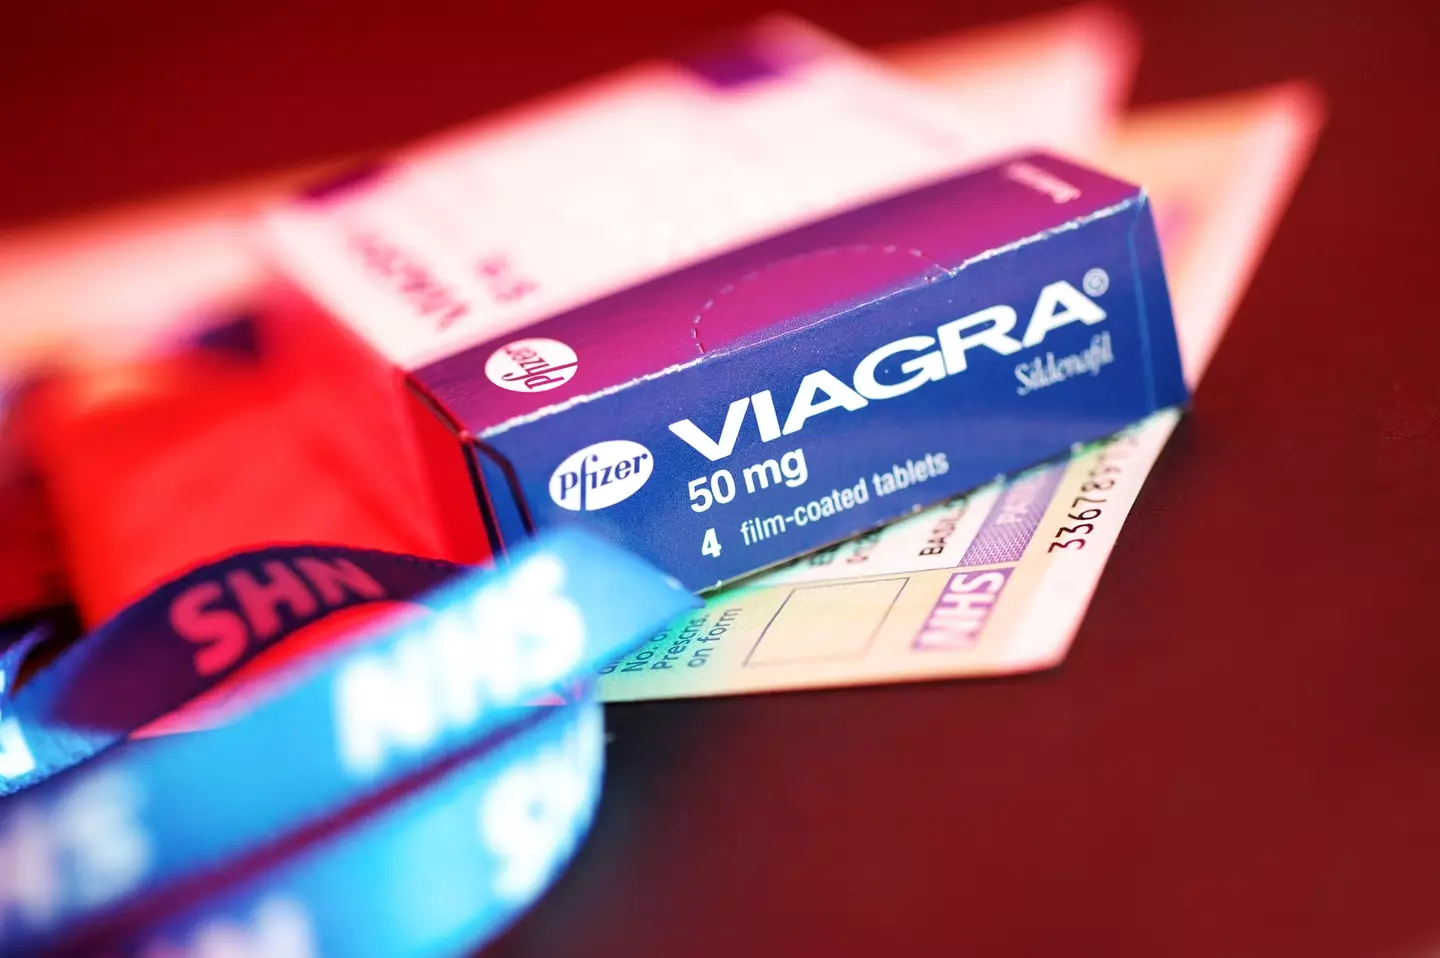 The common brand name for the drug is Viagra.